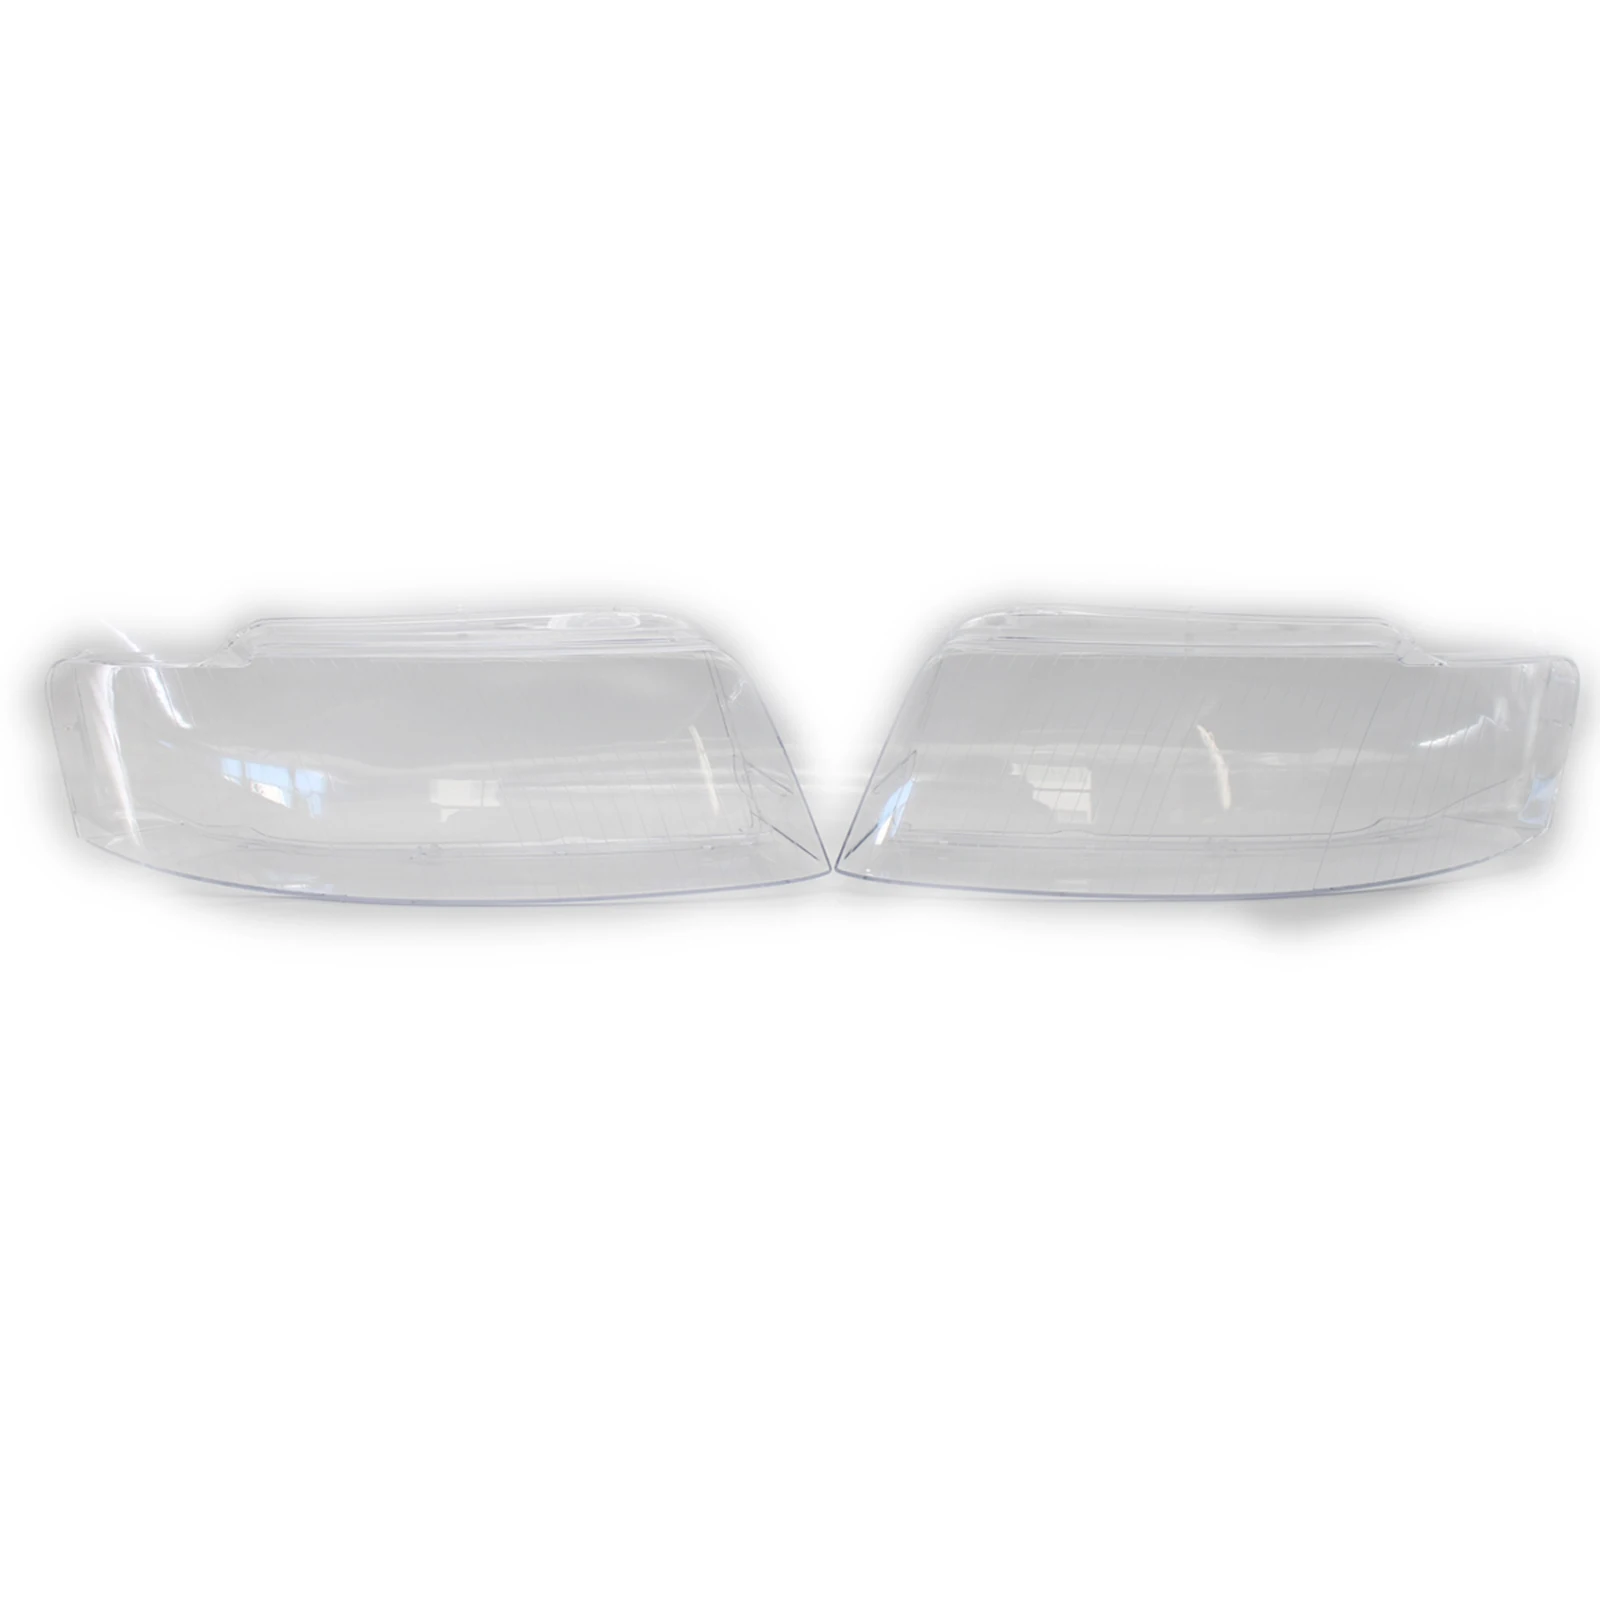 Automotive Pair Headlight Lens Cover Clear Shell for  A4 8E B6 2002-2004